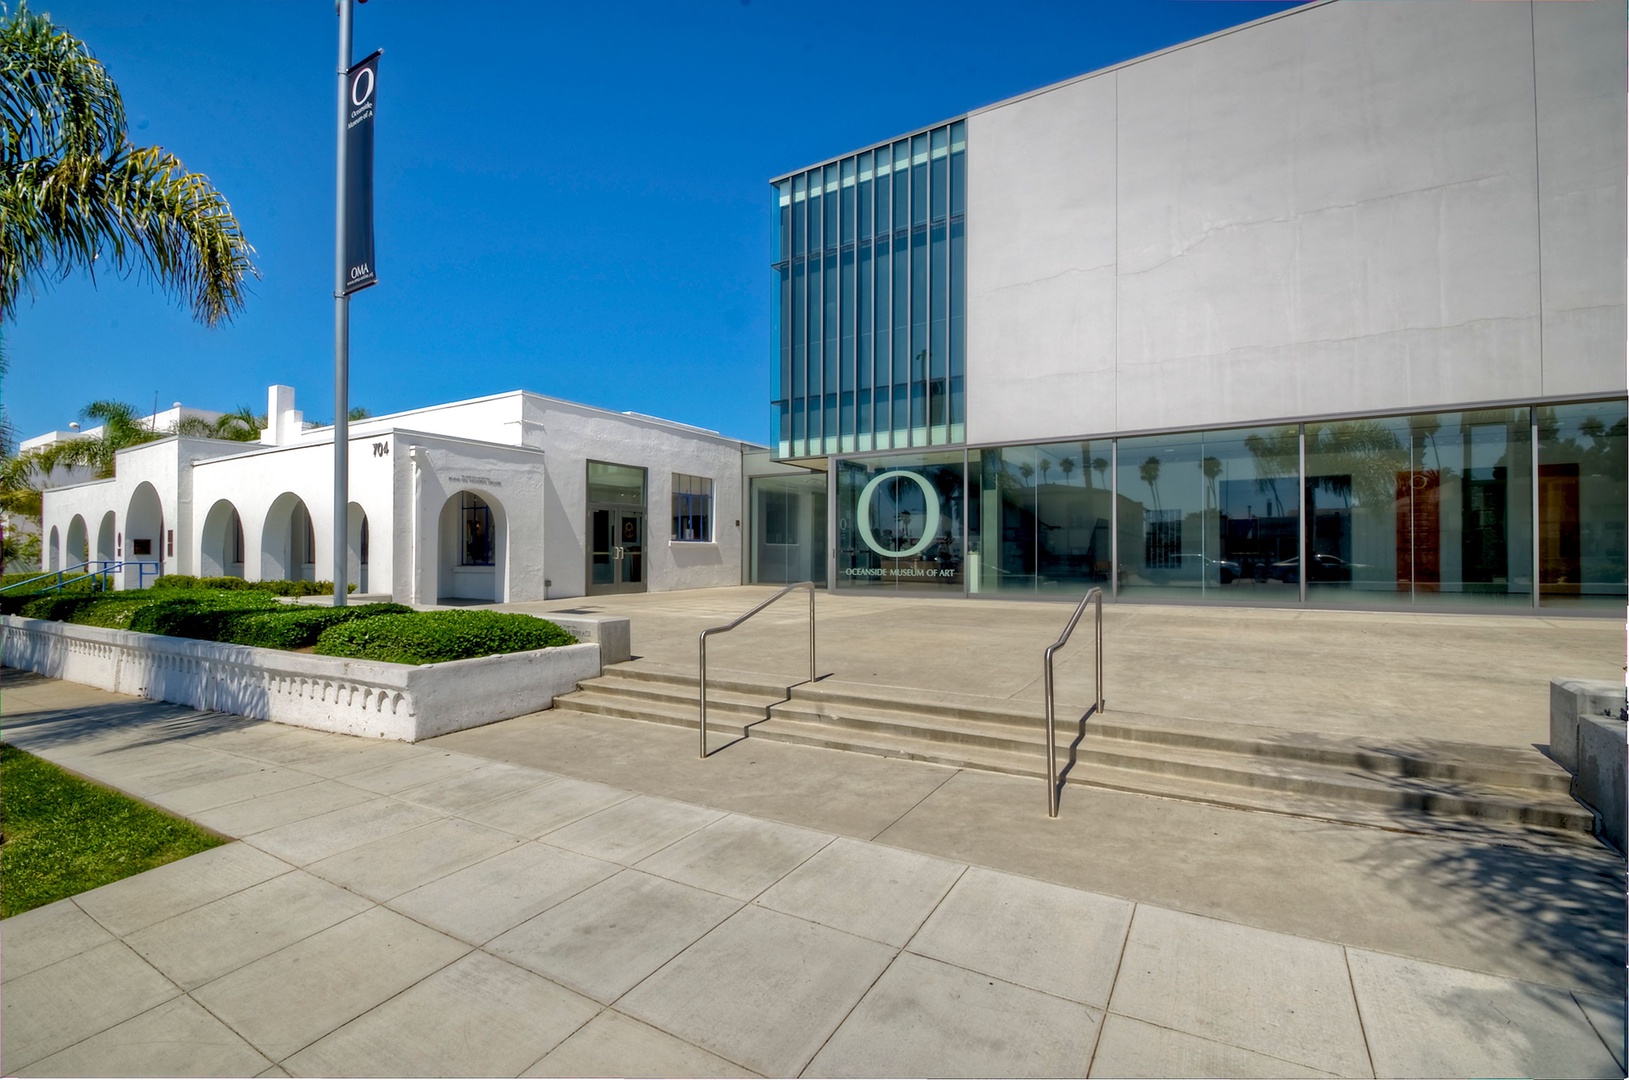 Explore local attractions such as the Oceanside Civic Center